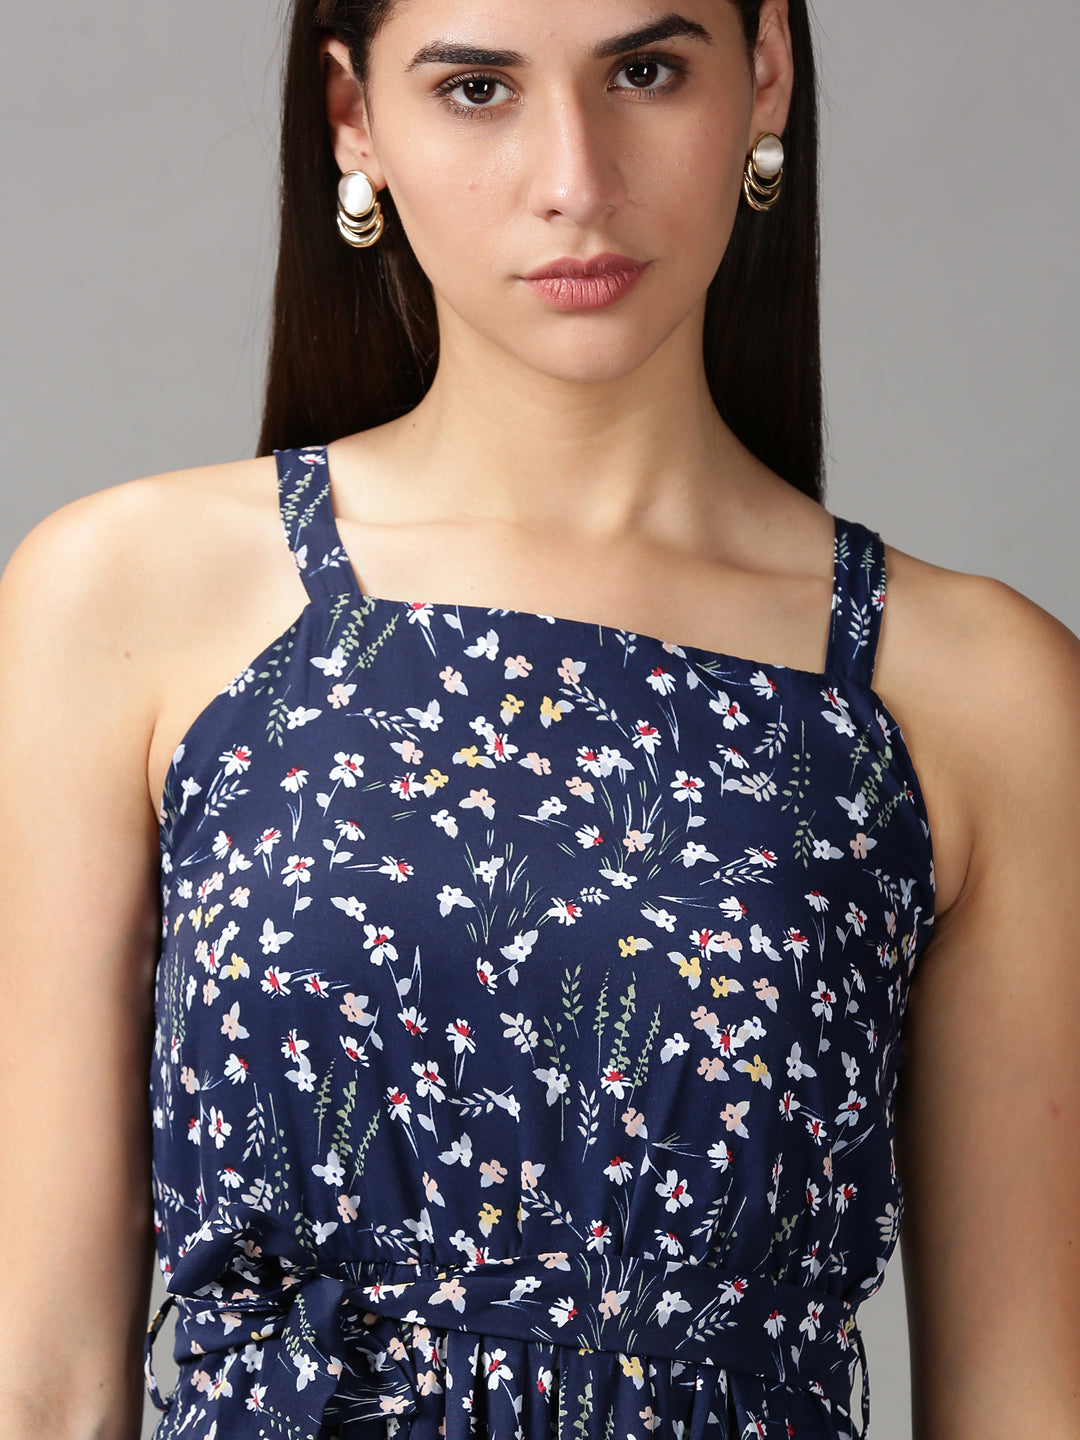 Women's Navy Blue Floral Fit and Flare Dress